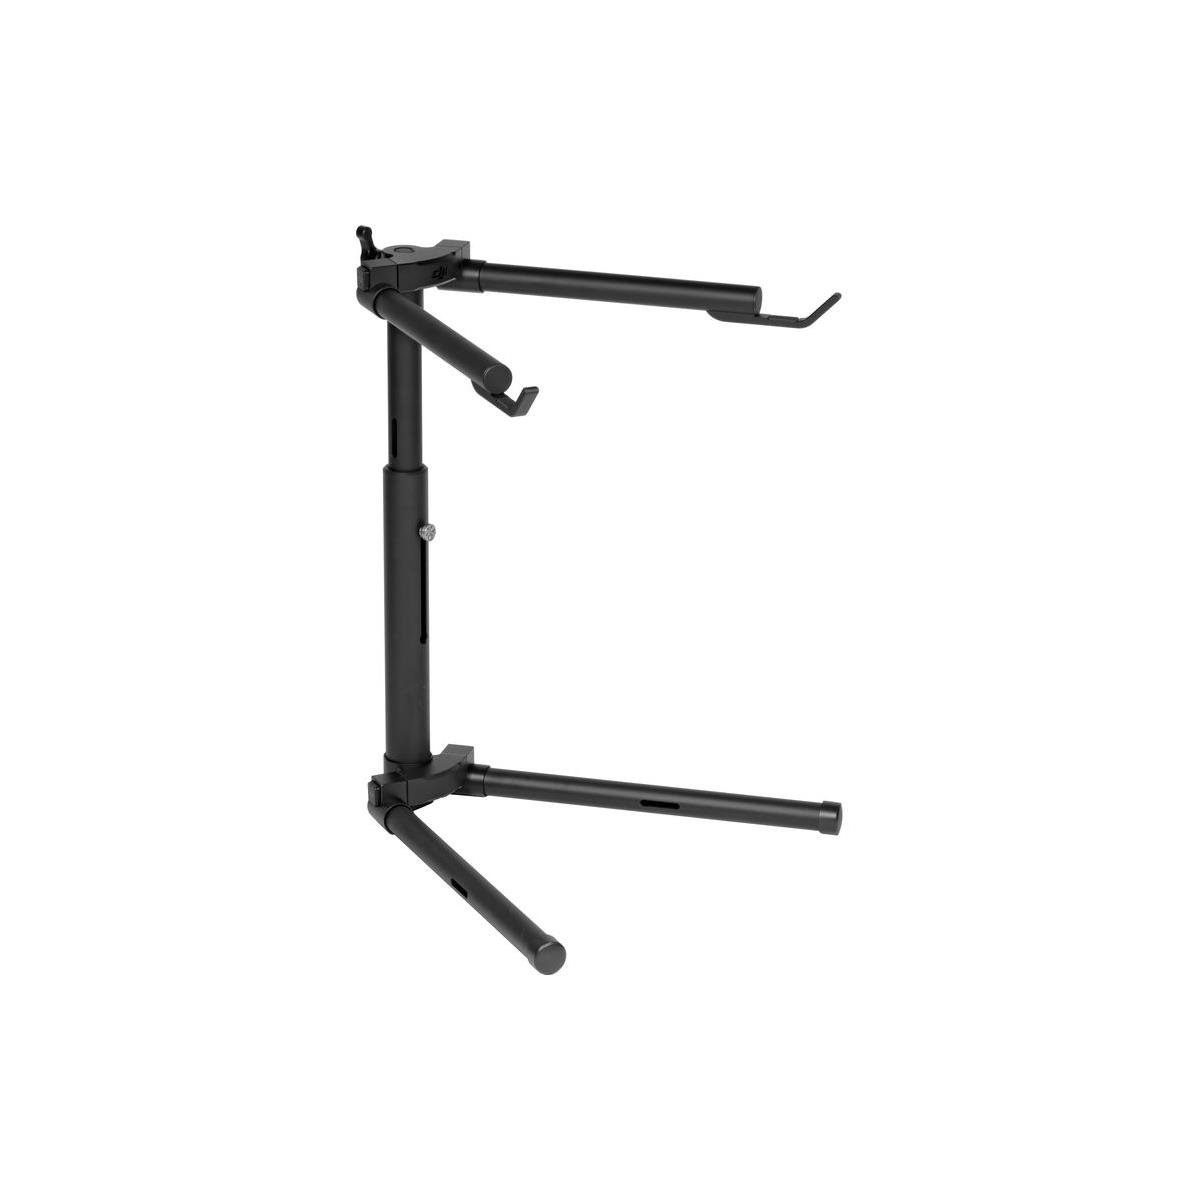 DJI Part 11 Foldable Tuning Stand for Ronin-M Gimbal Stabilizer -  CP.ZM.000187